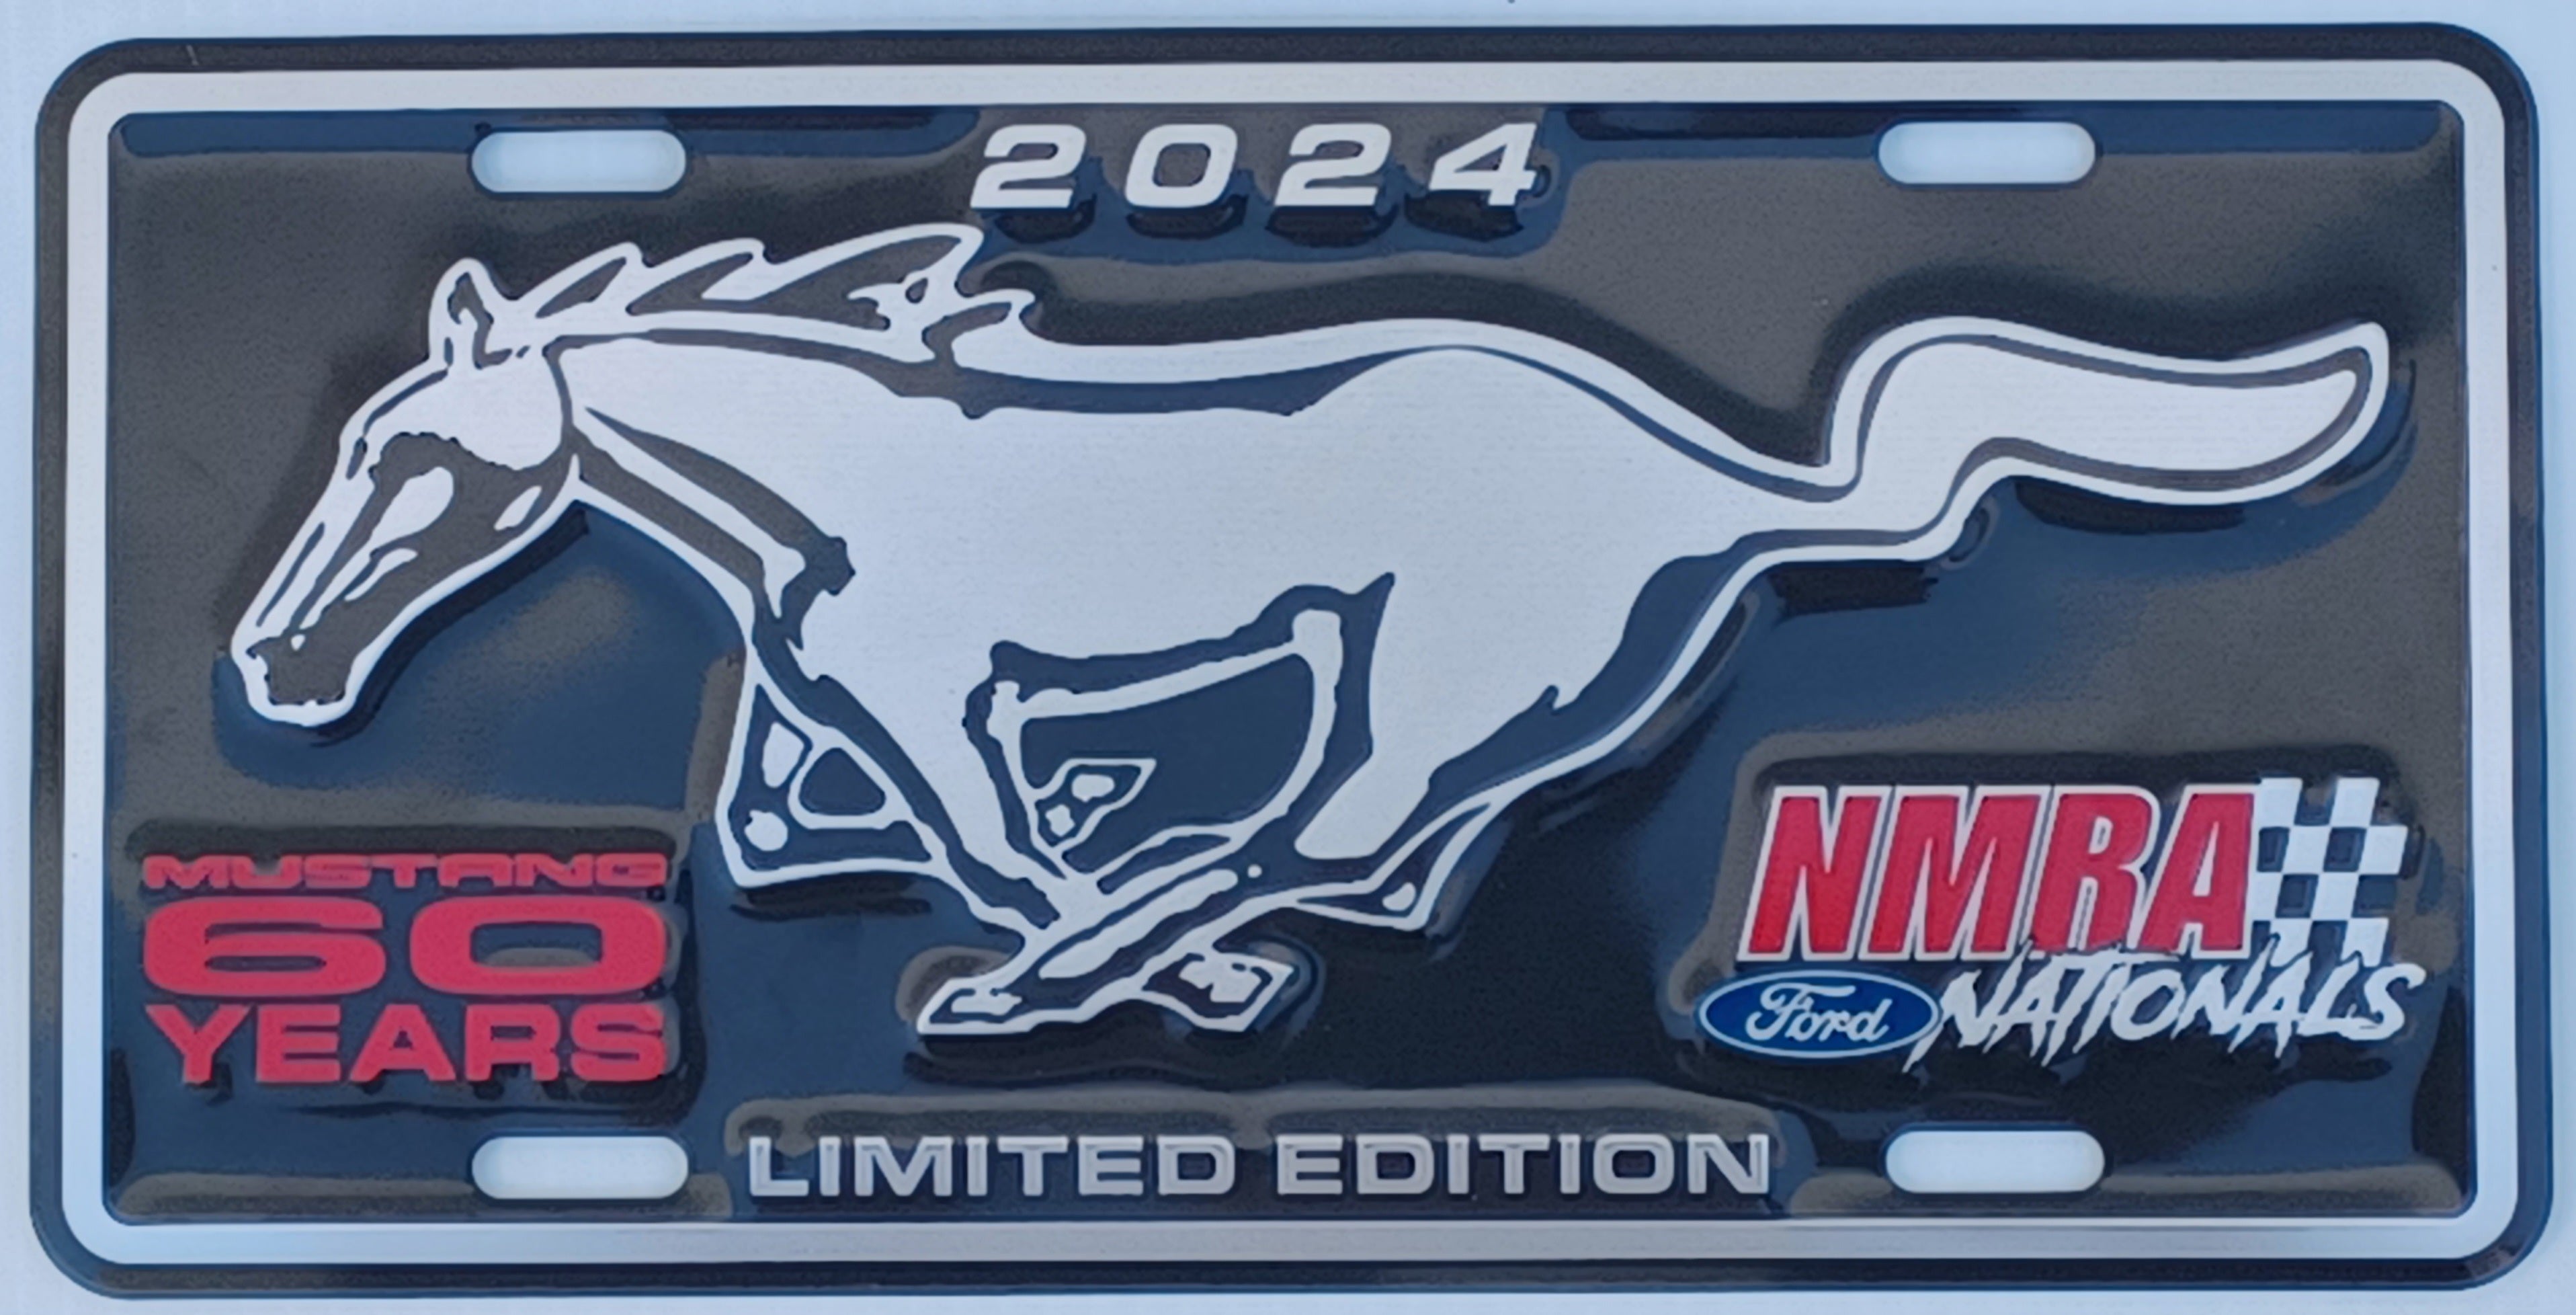 2024 Limited Edition NMRA Ford Nationals License Plate Official Store